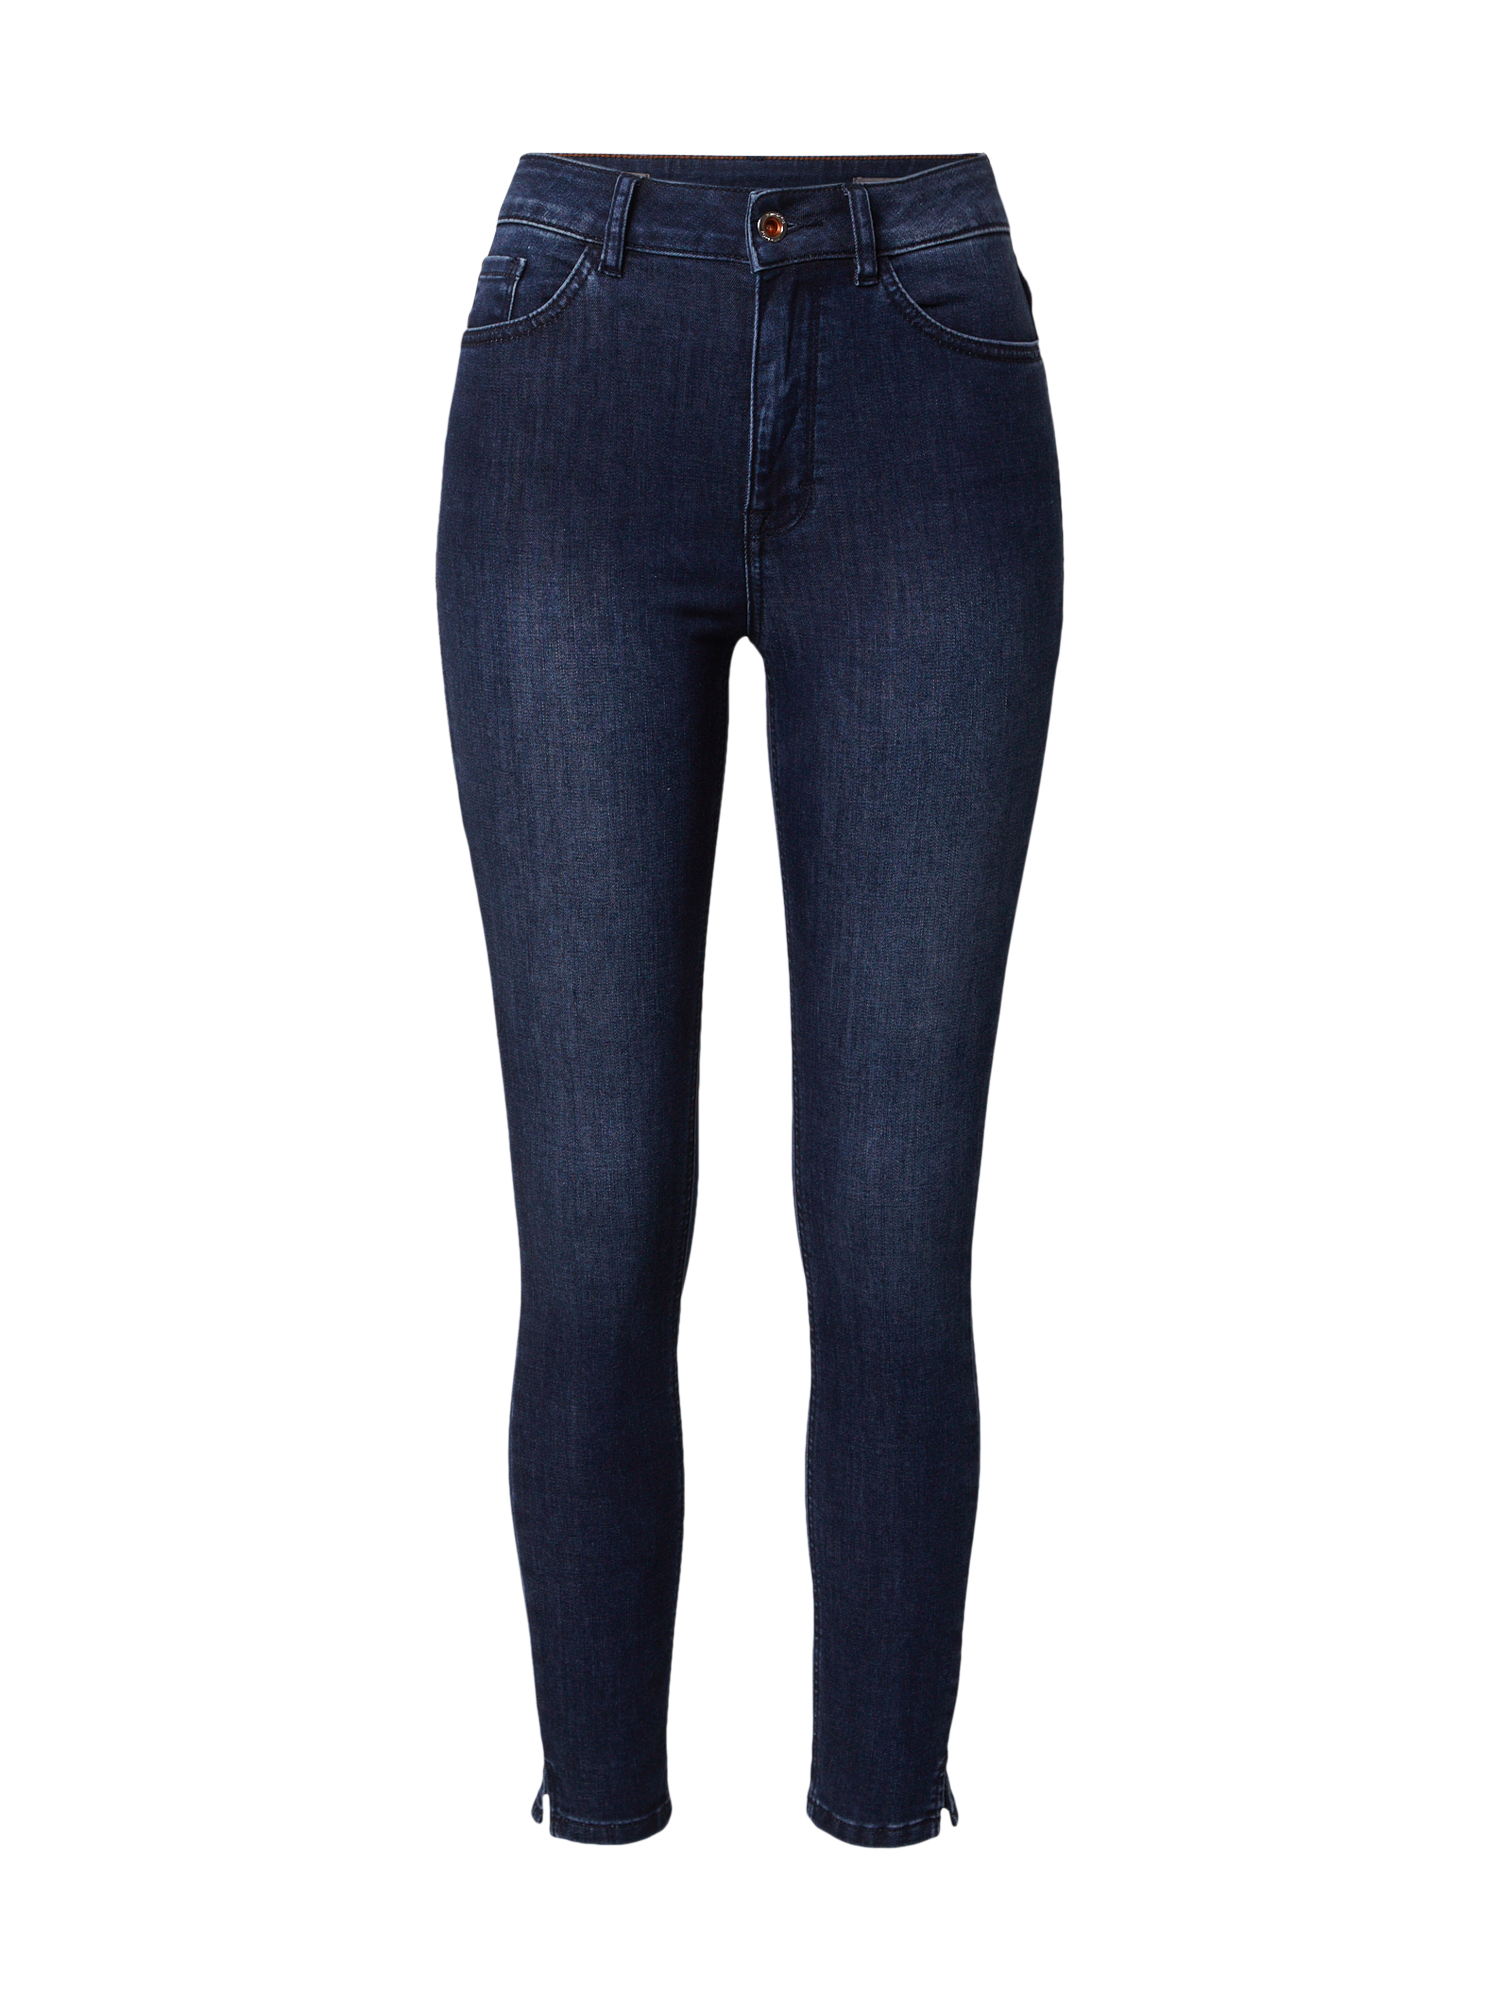 KX6hU Jeans MINE TO FIVE Jeans Kate in Navy 